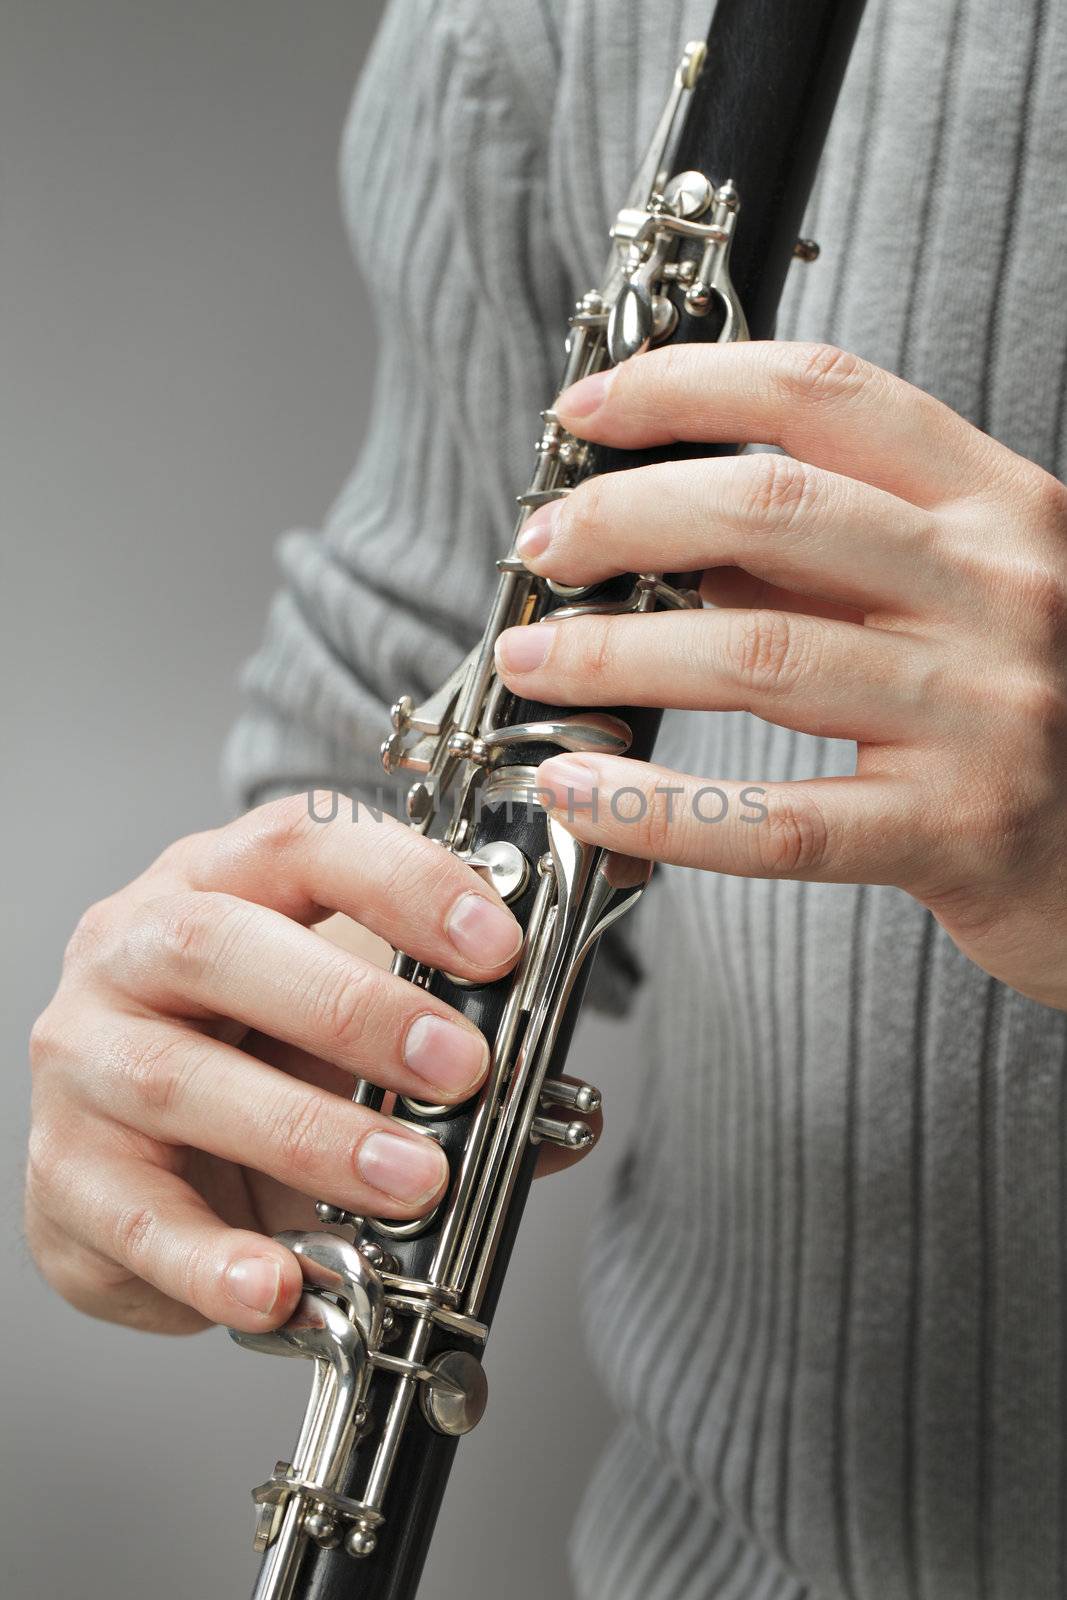 Clarinet by Stocksnapper